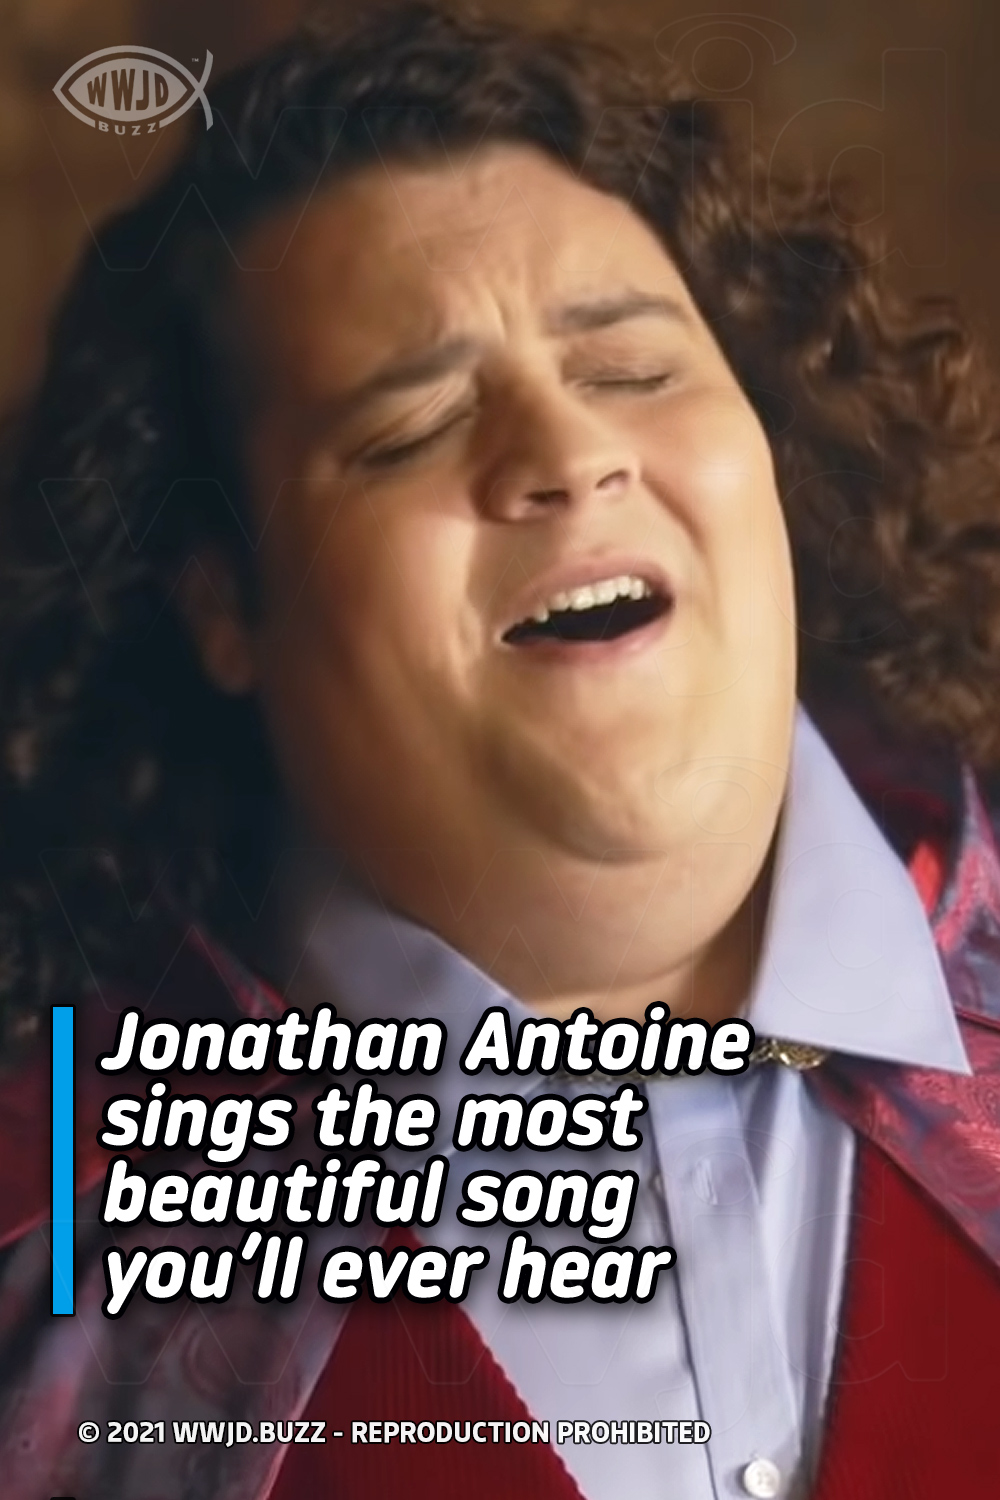 Jonathan Antoine sings the most beautiful song you’ll ever hear